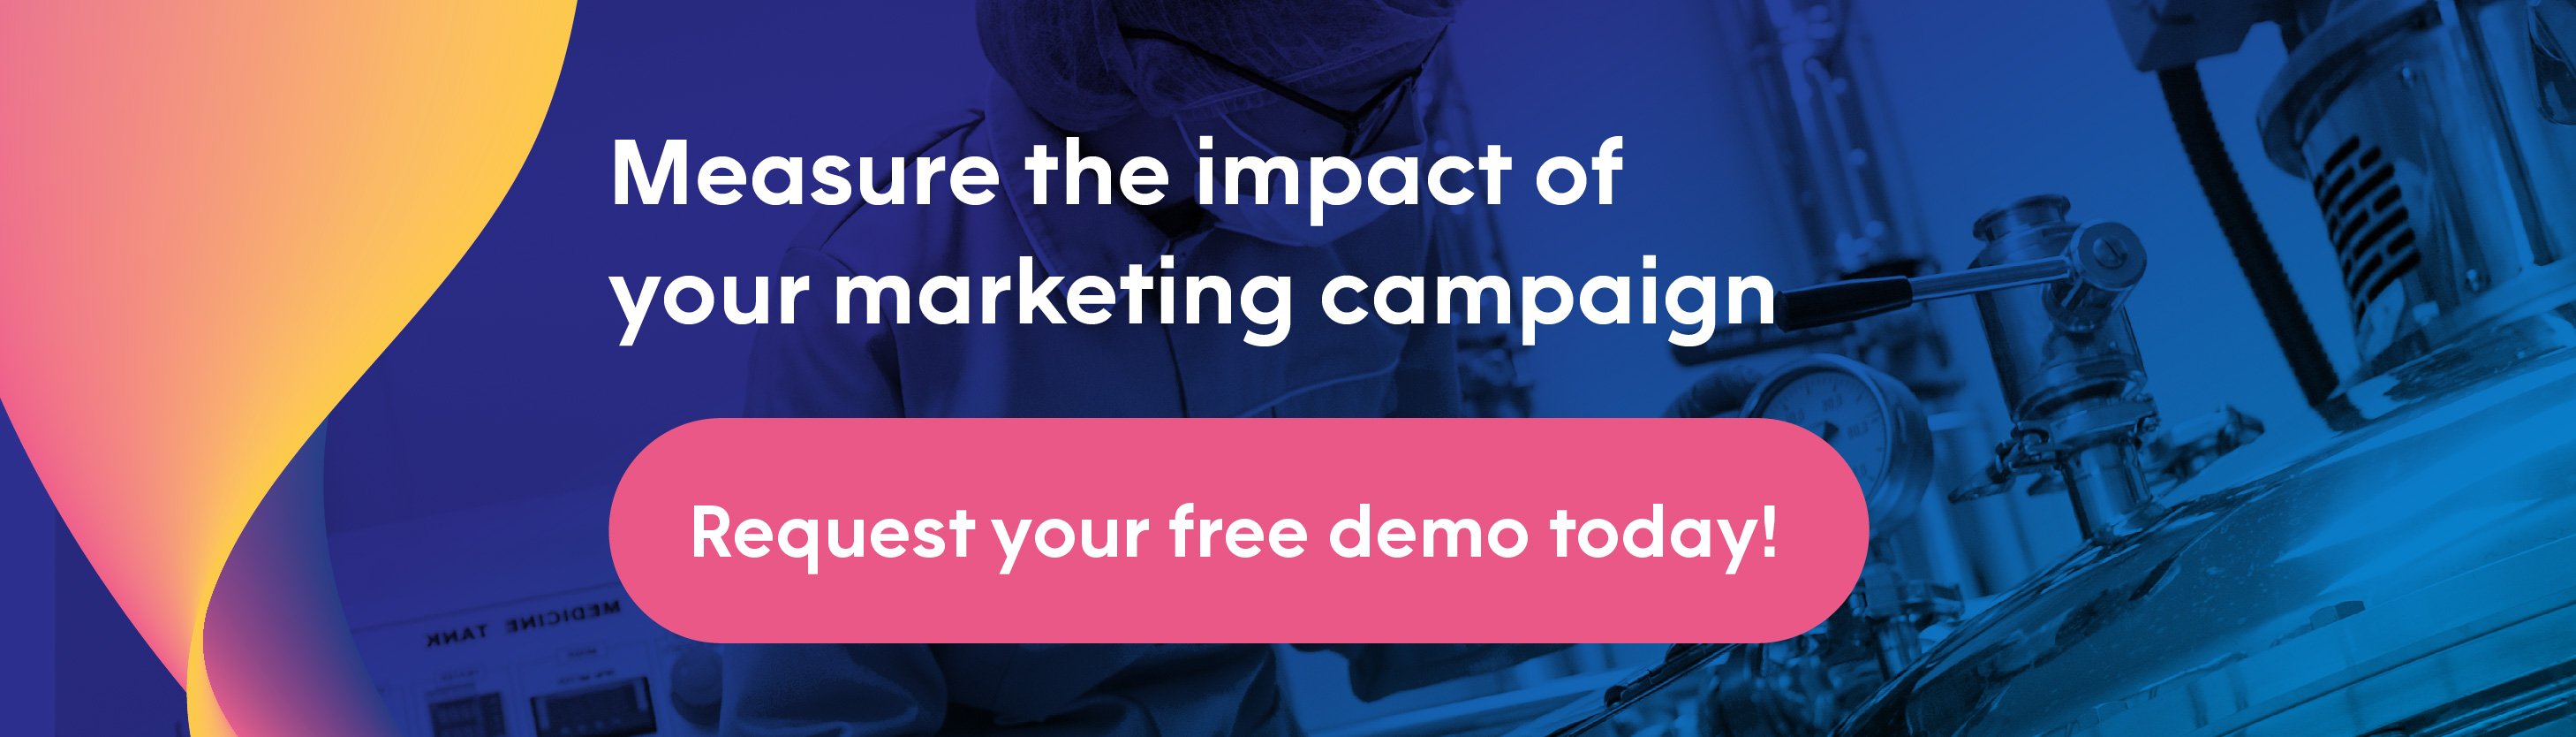 Request your free demo today!